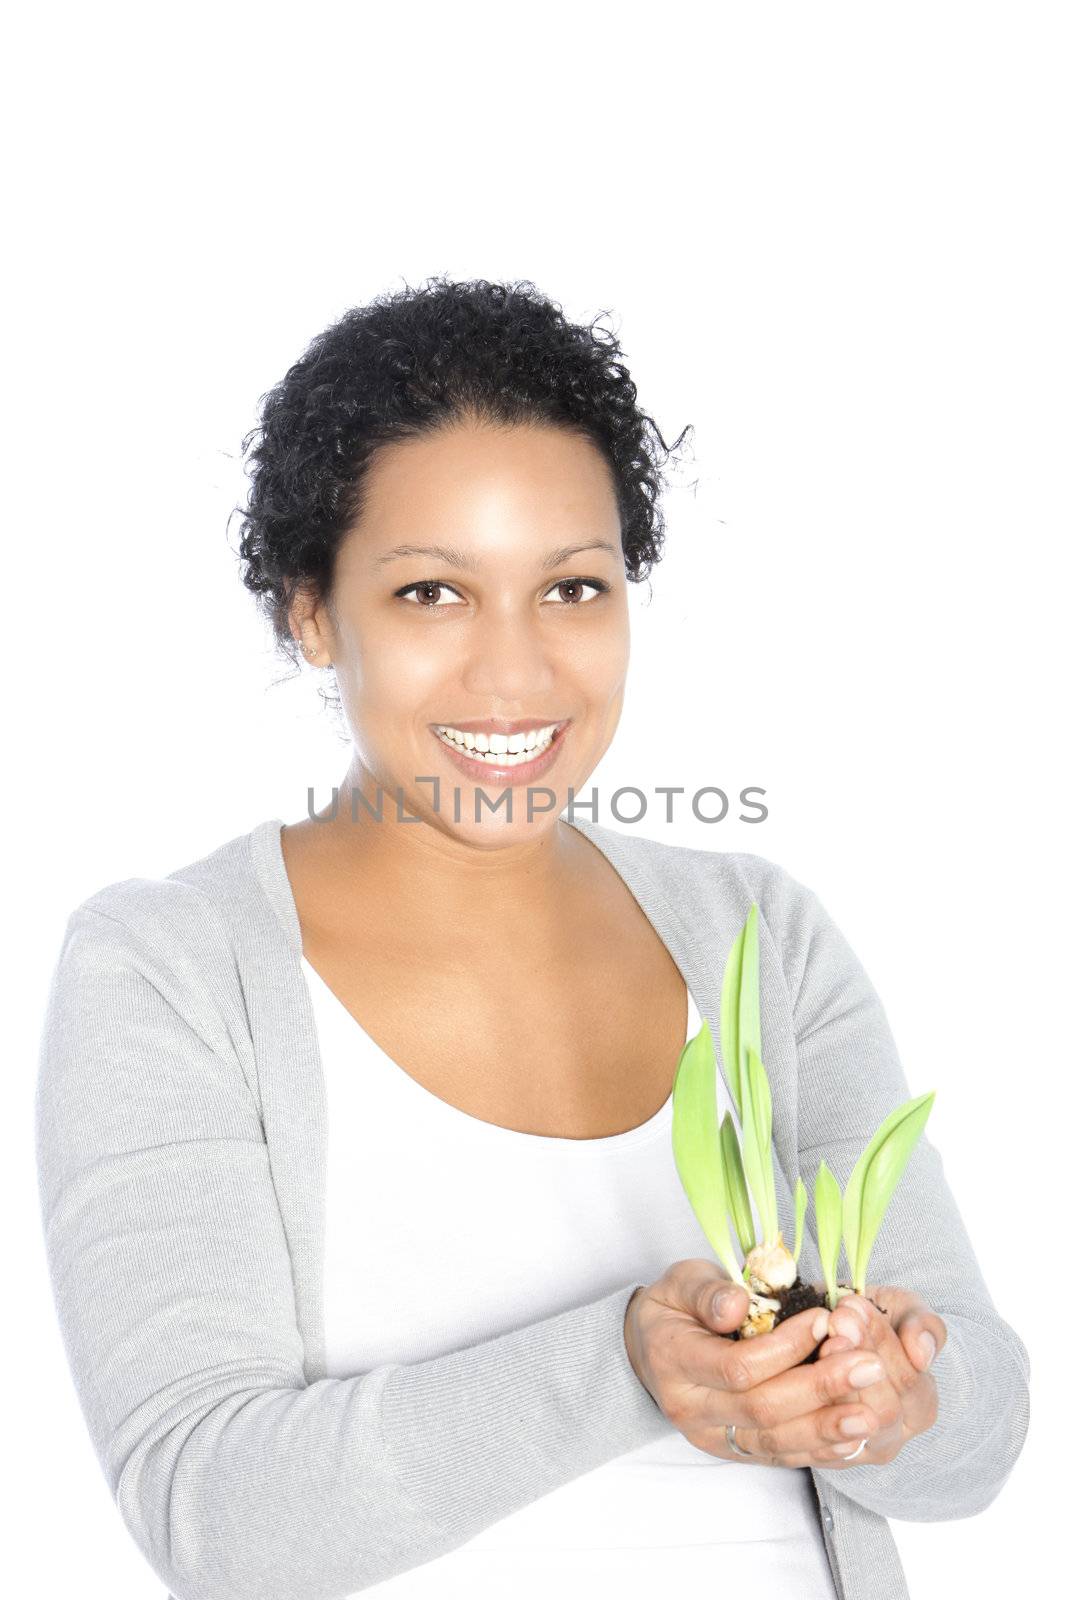 Smiling beautiful African American woman holding sprouting sping bulbs in her cupped hands isolated on white